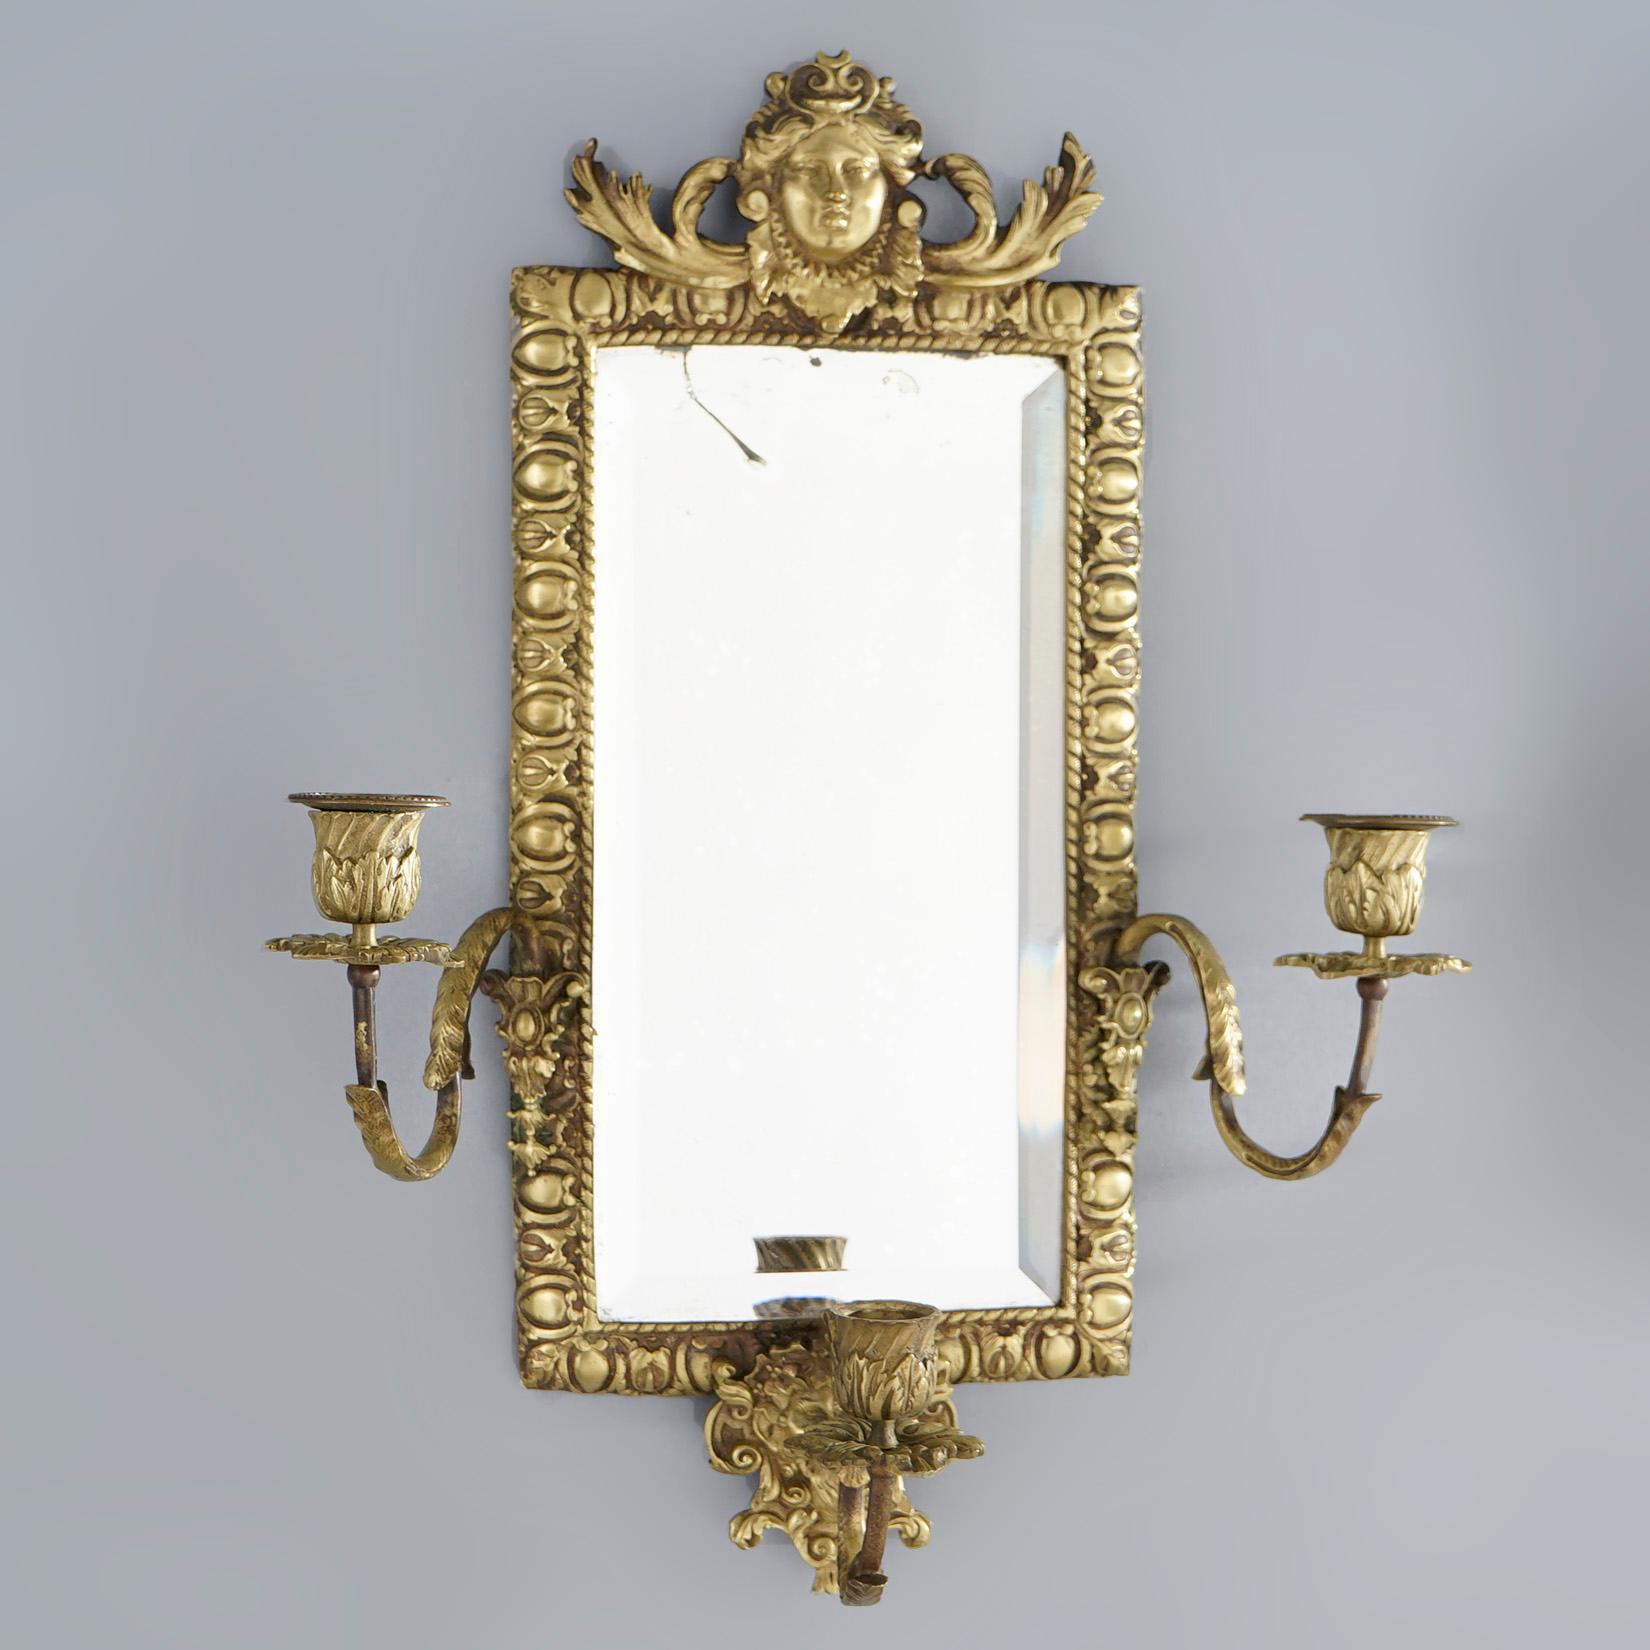 A matching pair of antique Victorian wall sconces offer gilt cast metal frames with female mask at crest surmounting beveled mirrors and three scroll form arms terminating in candle sockets, foliate elements throughout, 19th century

Measures-